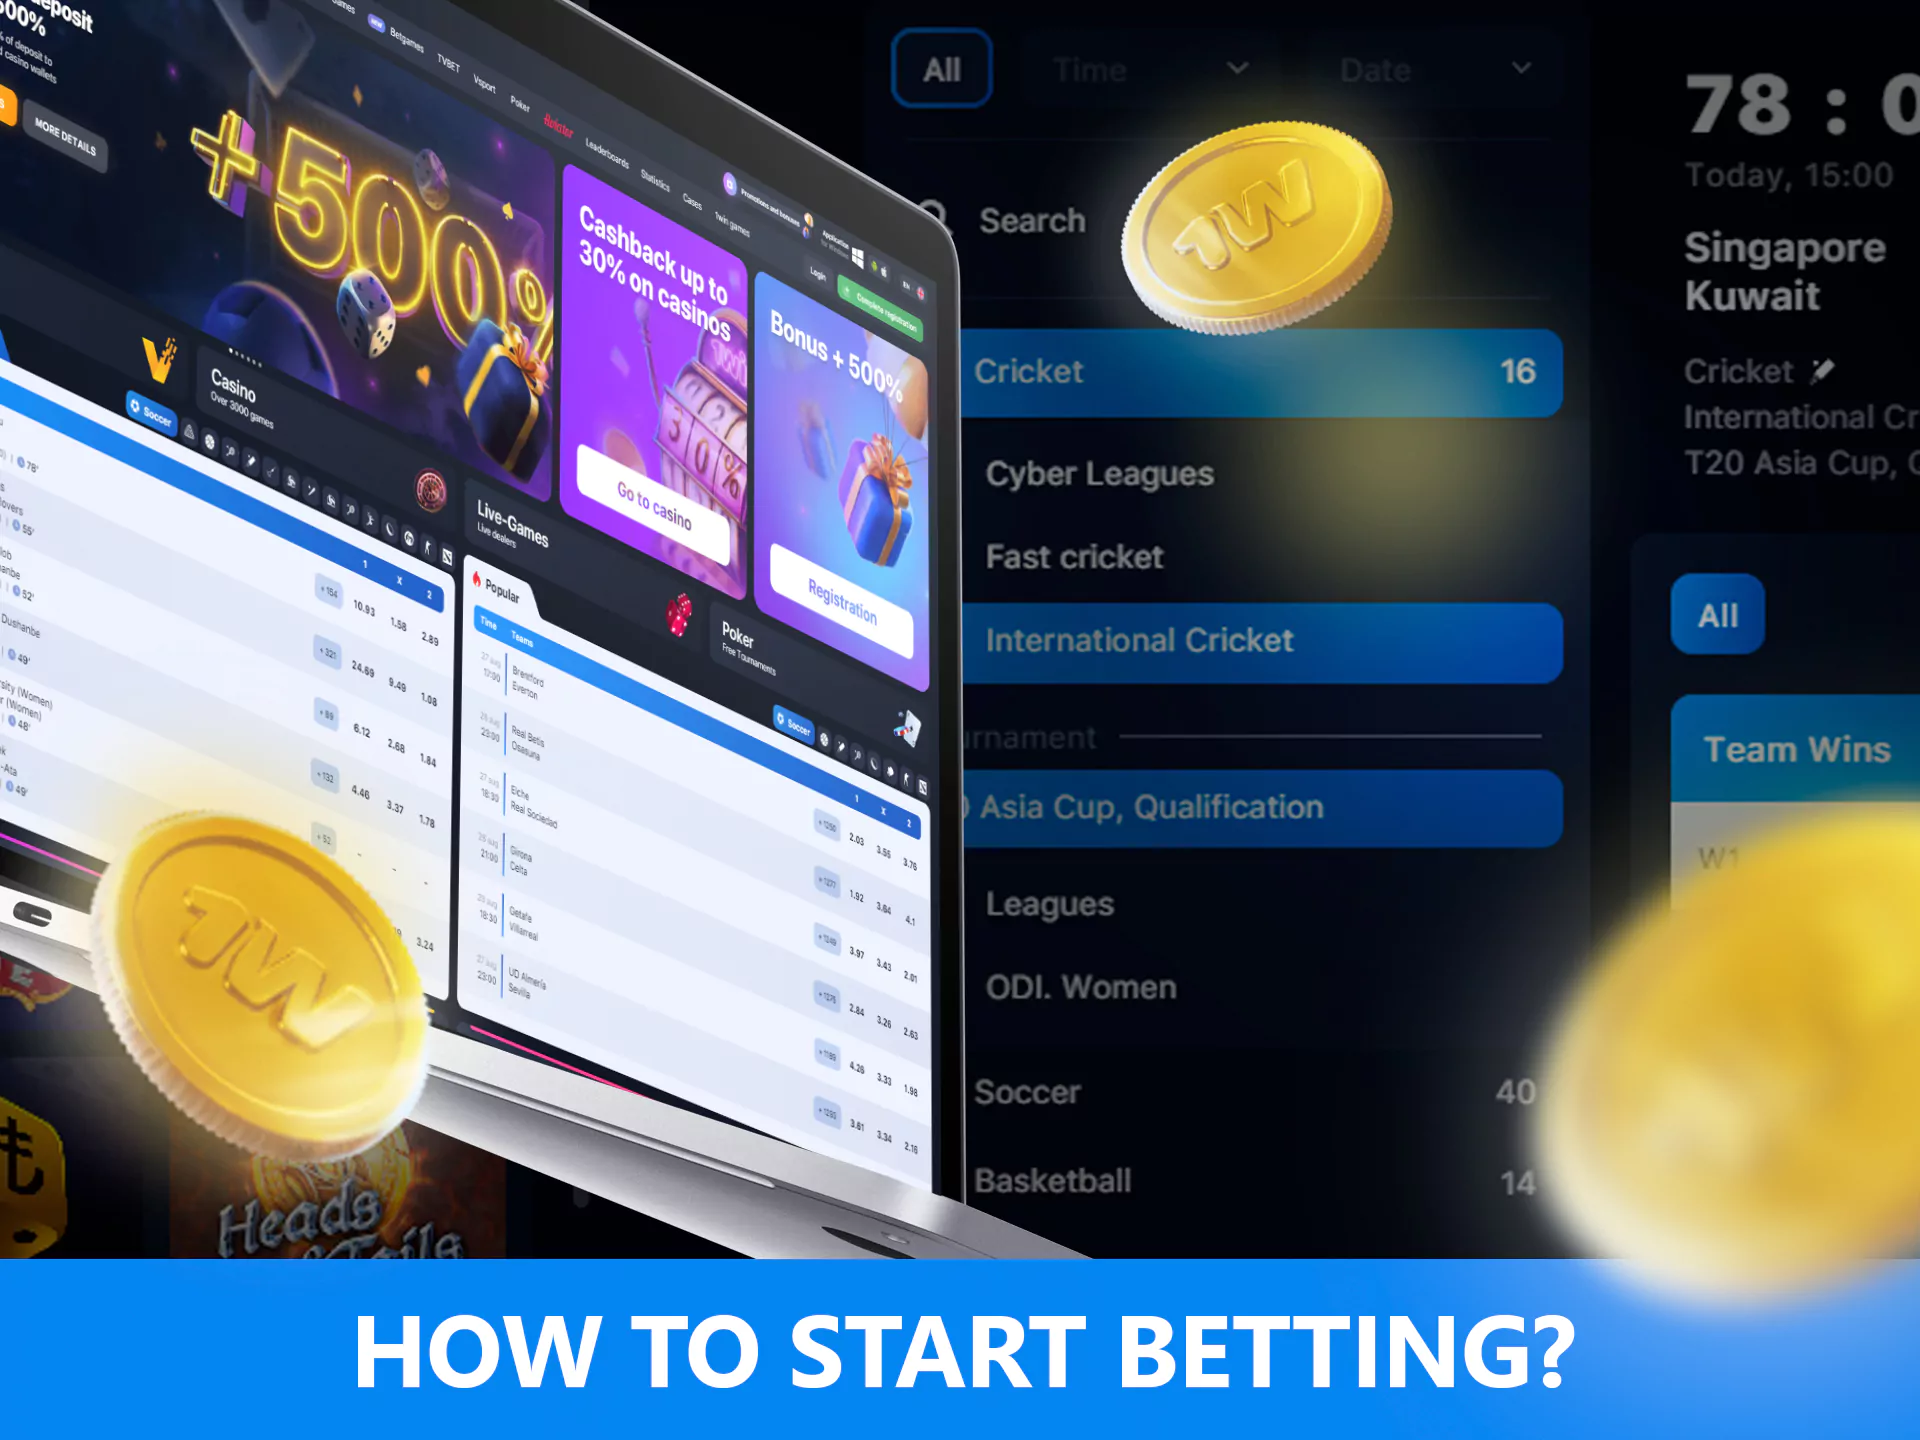 To start betting, you should sign up or log in to the 1win account.